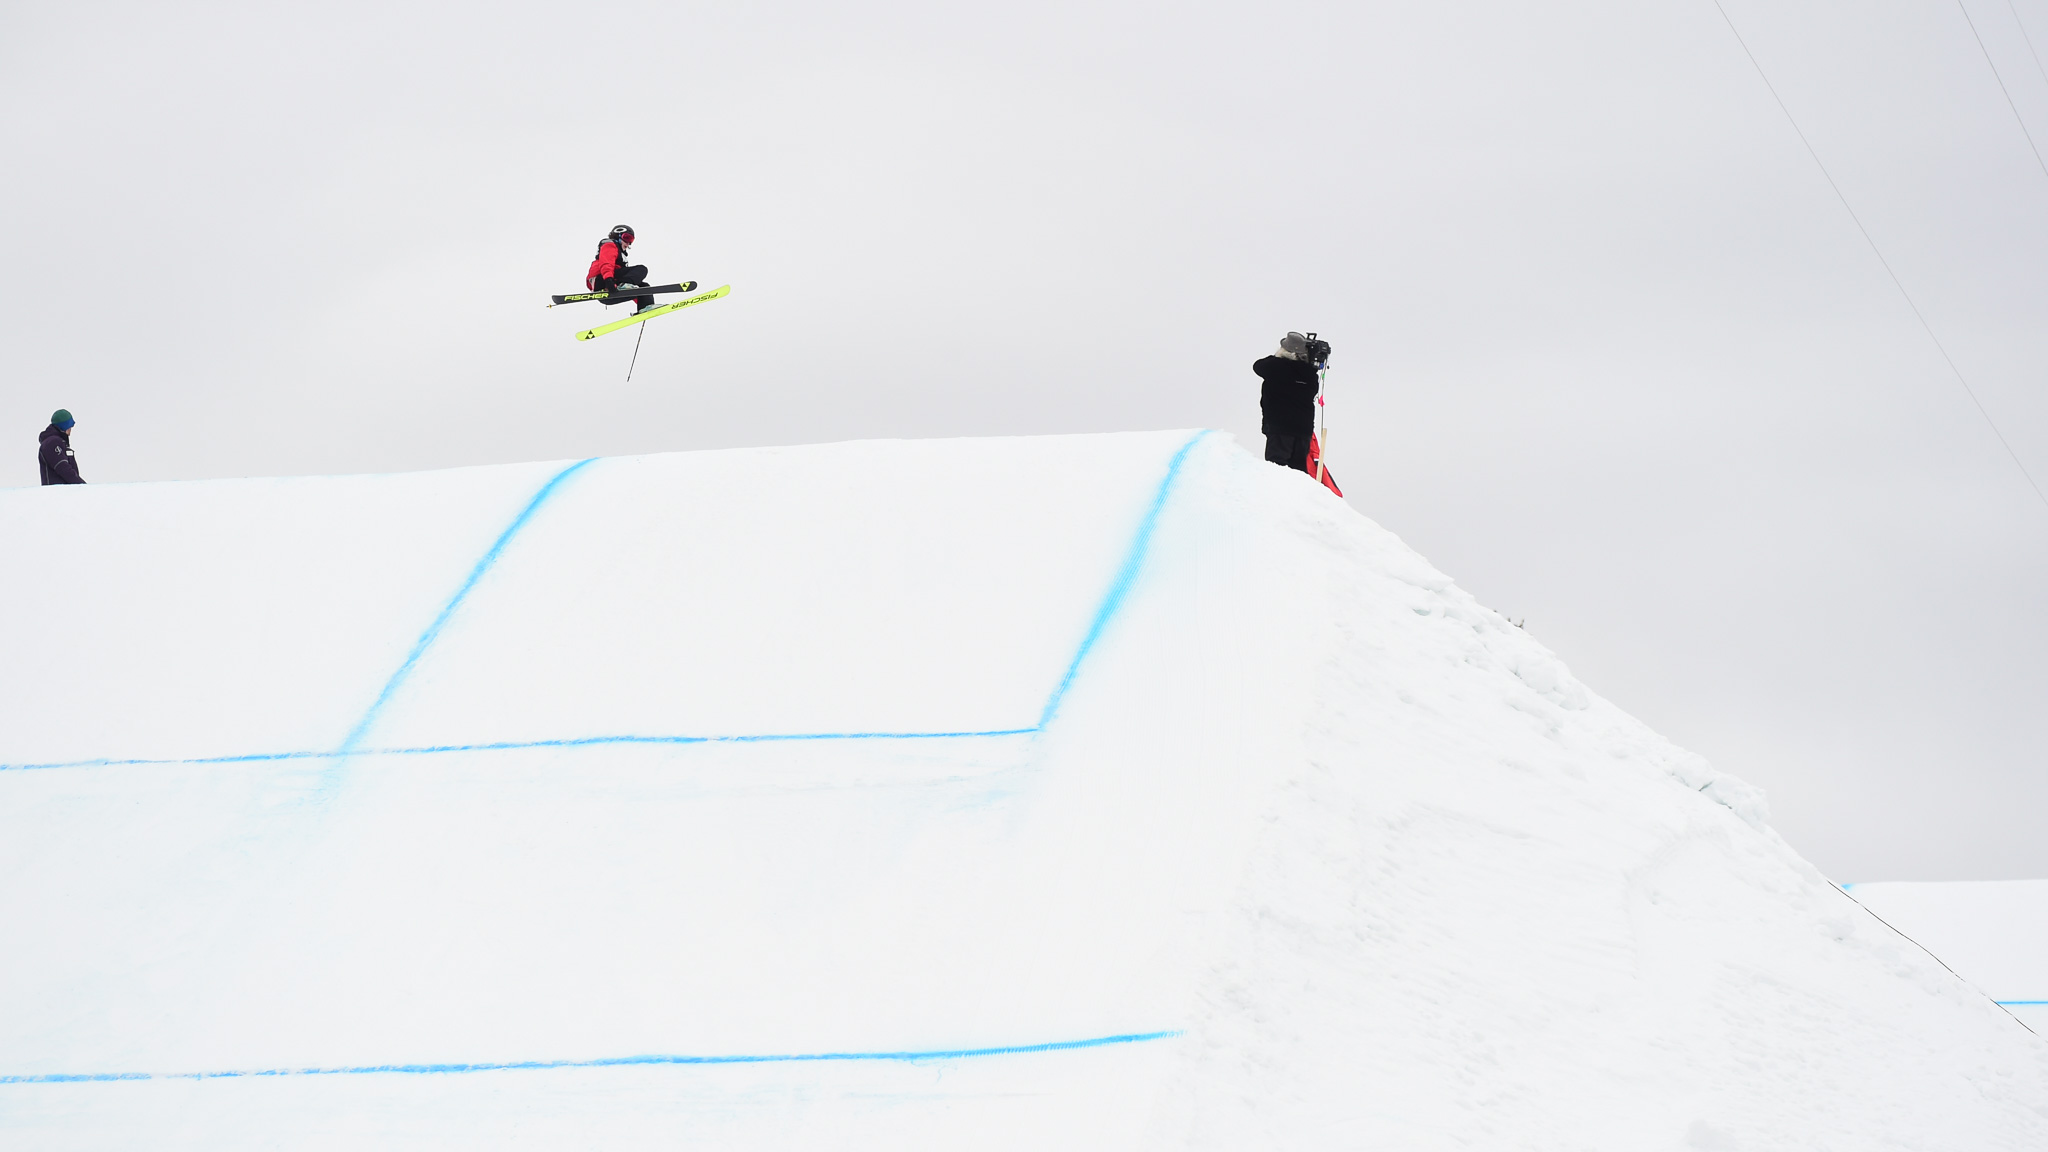 Twenty-year-old Anouk Purnelle-Faniel, from Canada, is an X Games rookie and also relatively new to the sport of freeskiing. She started skiing in 2012. She finished in seventh in the women's Ski Slopestyle finals.